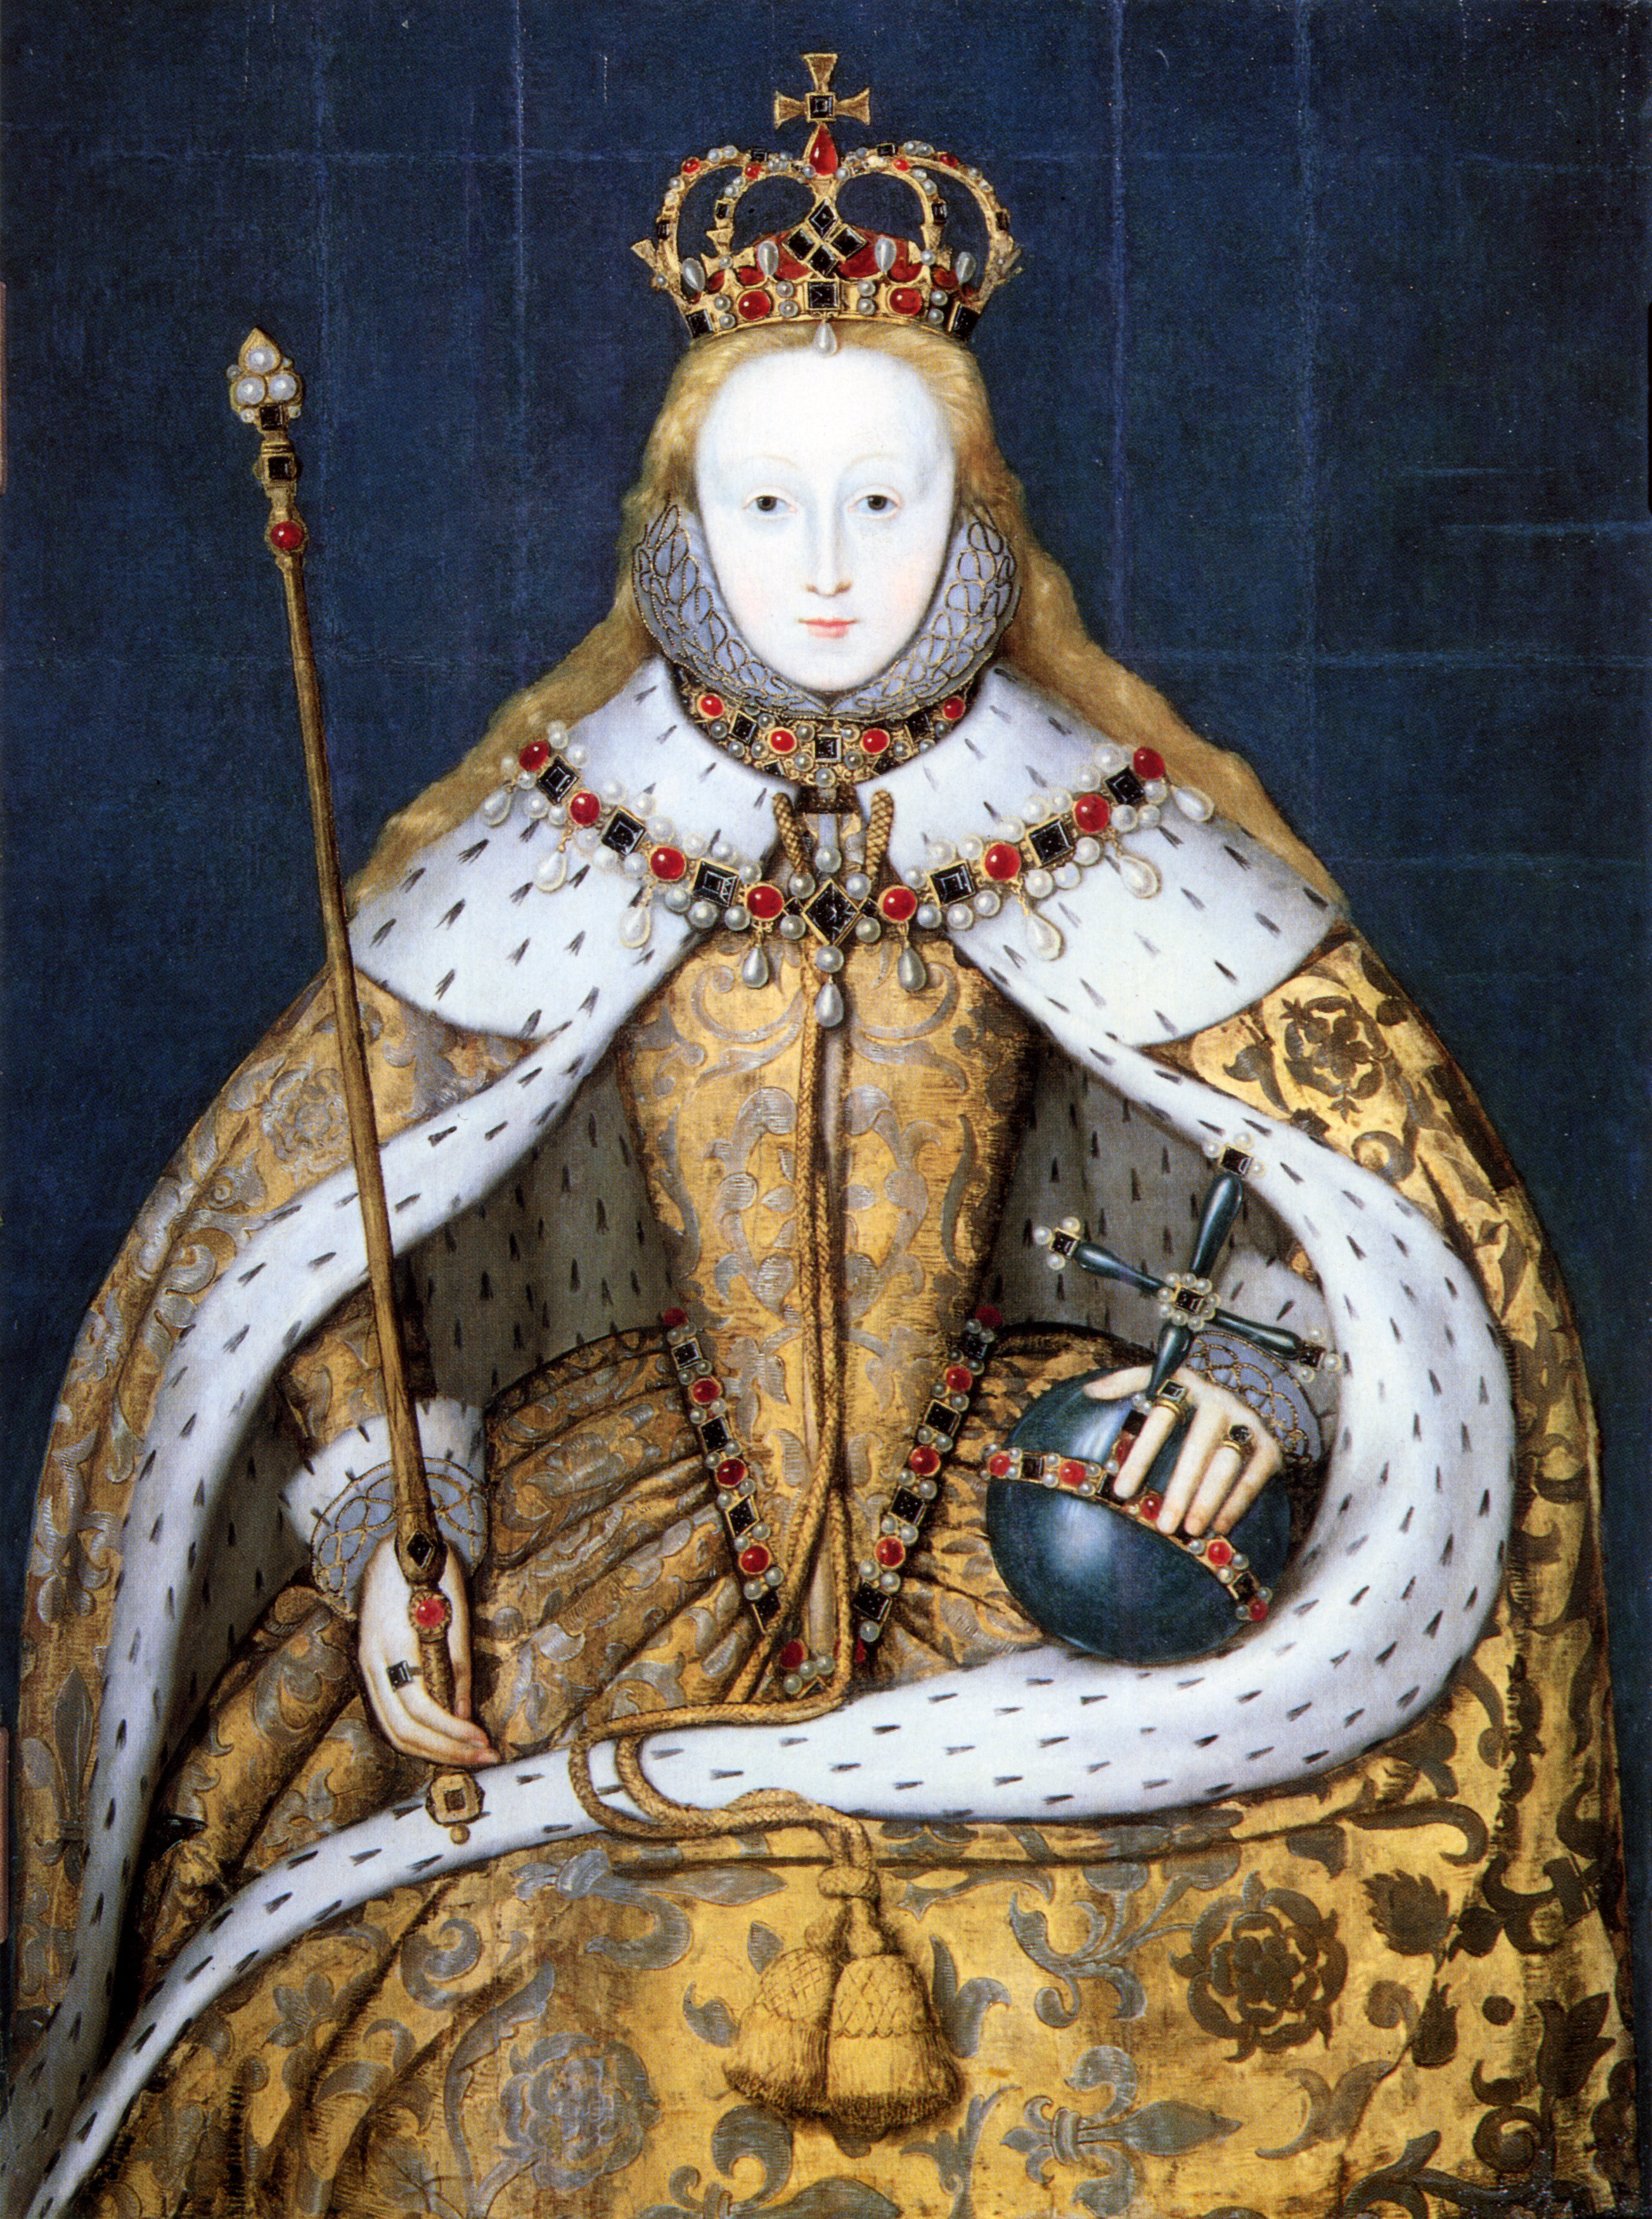 Elizabeth I in her coronation robes, patterned with Tudor roses and trimmed with ermine